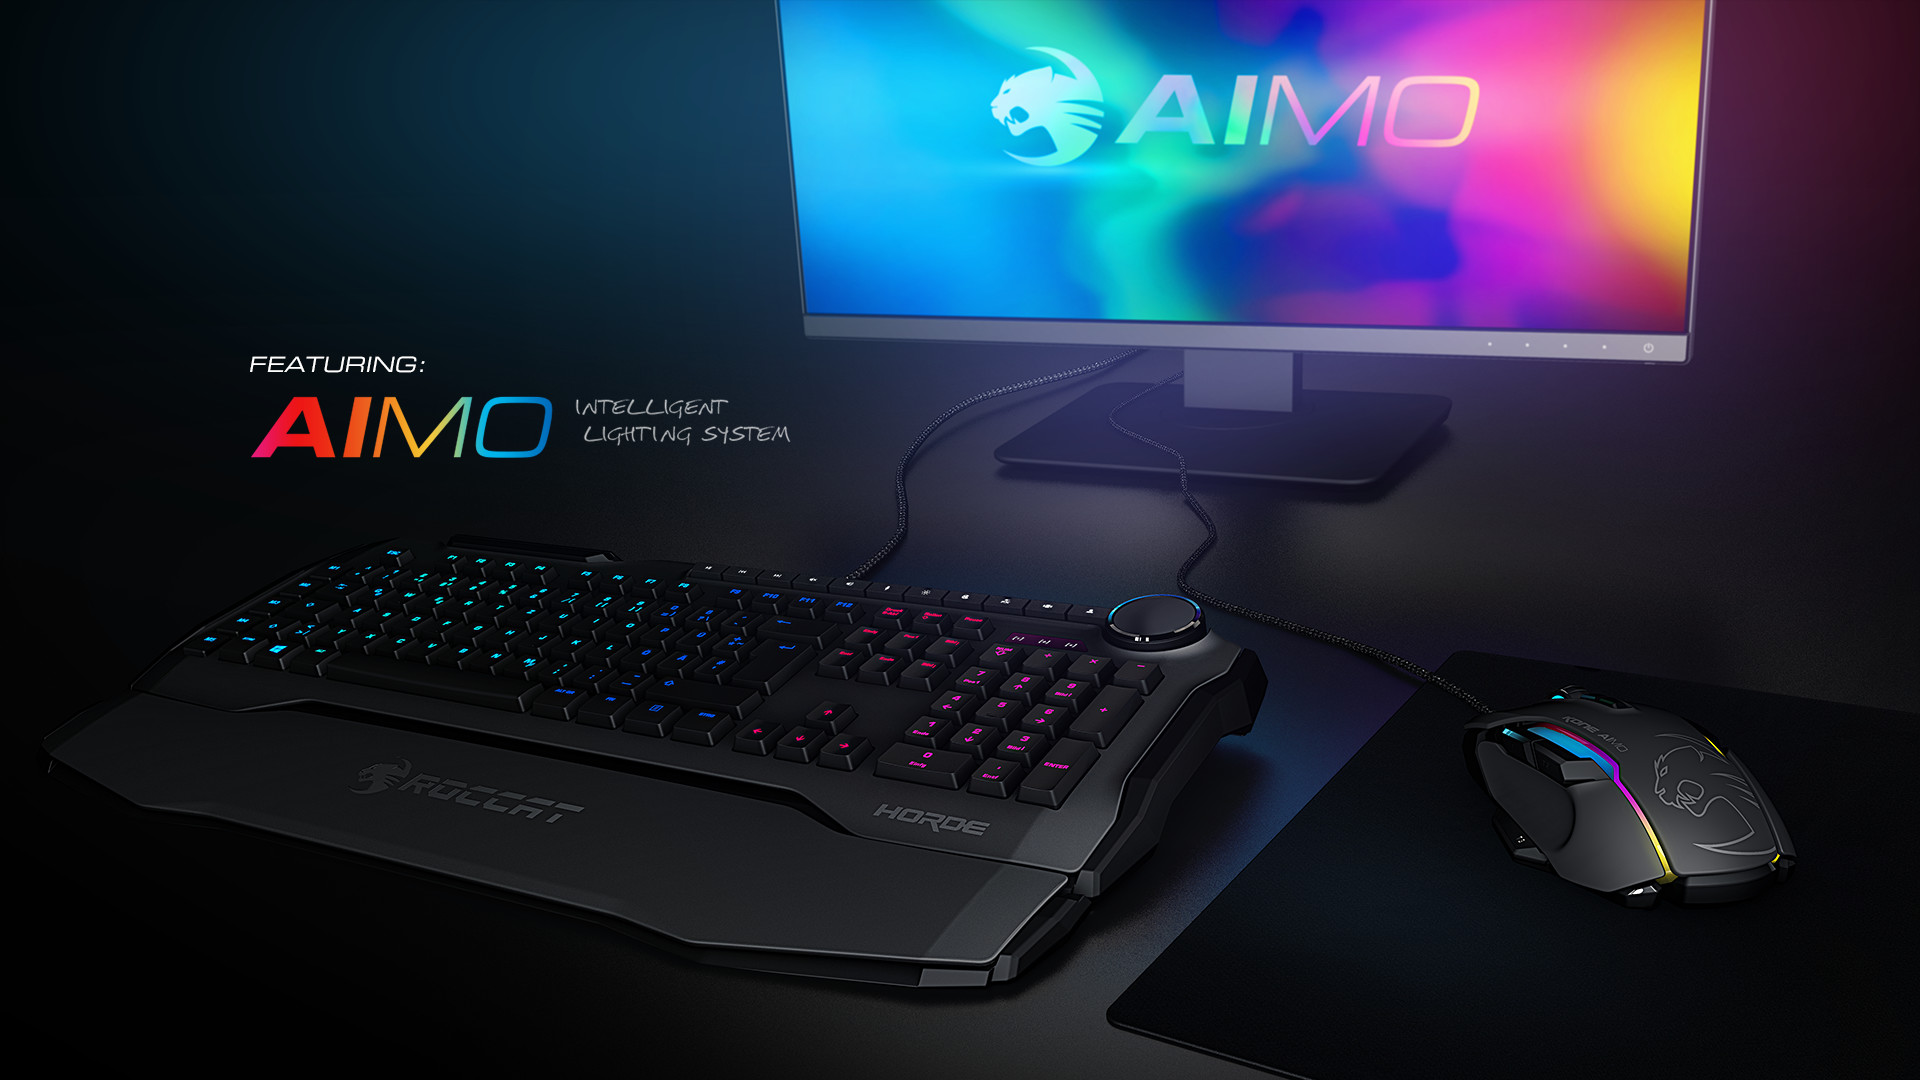 Introducing Membrane - Aimo , HD Wallpaper & Backgrounds